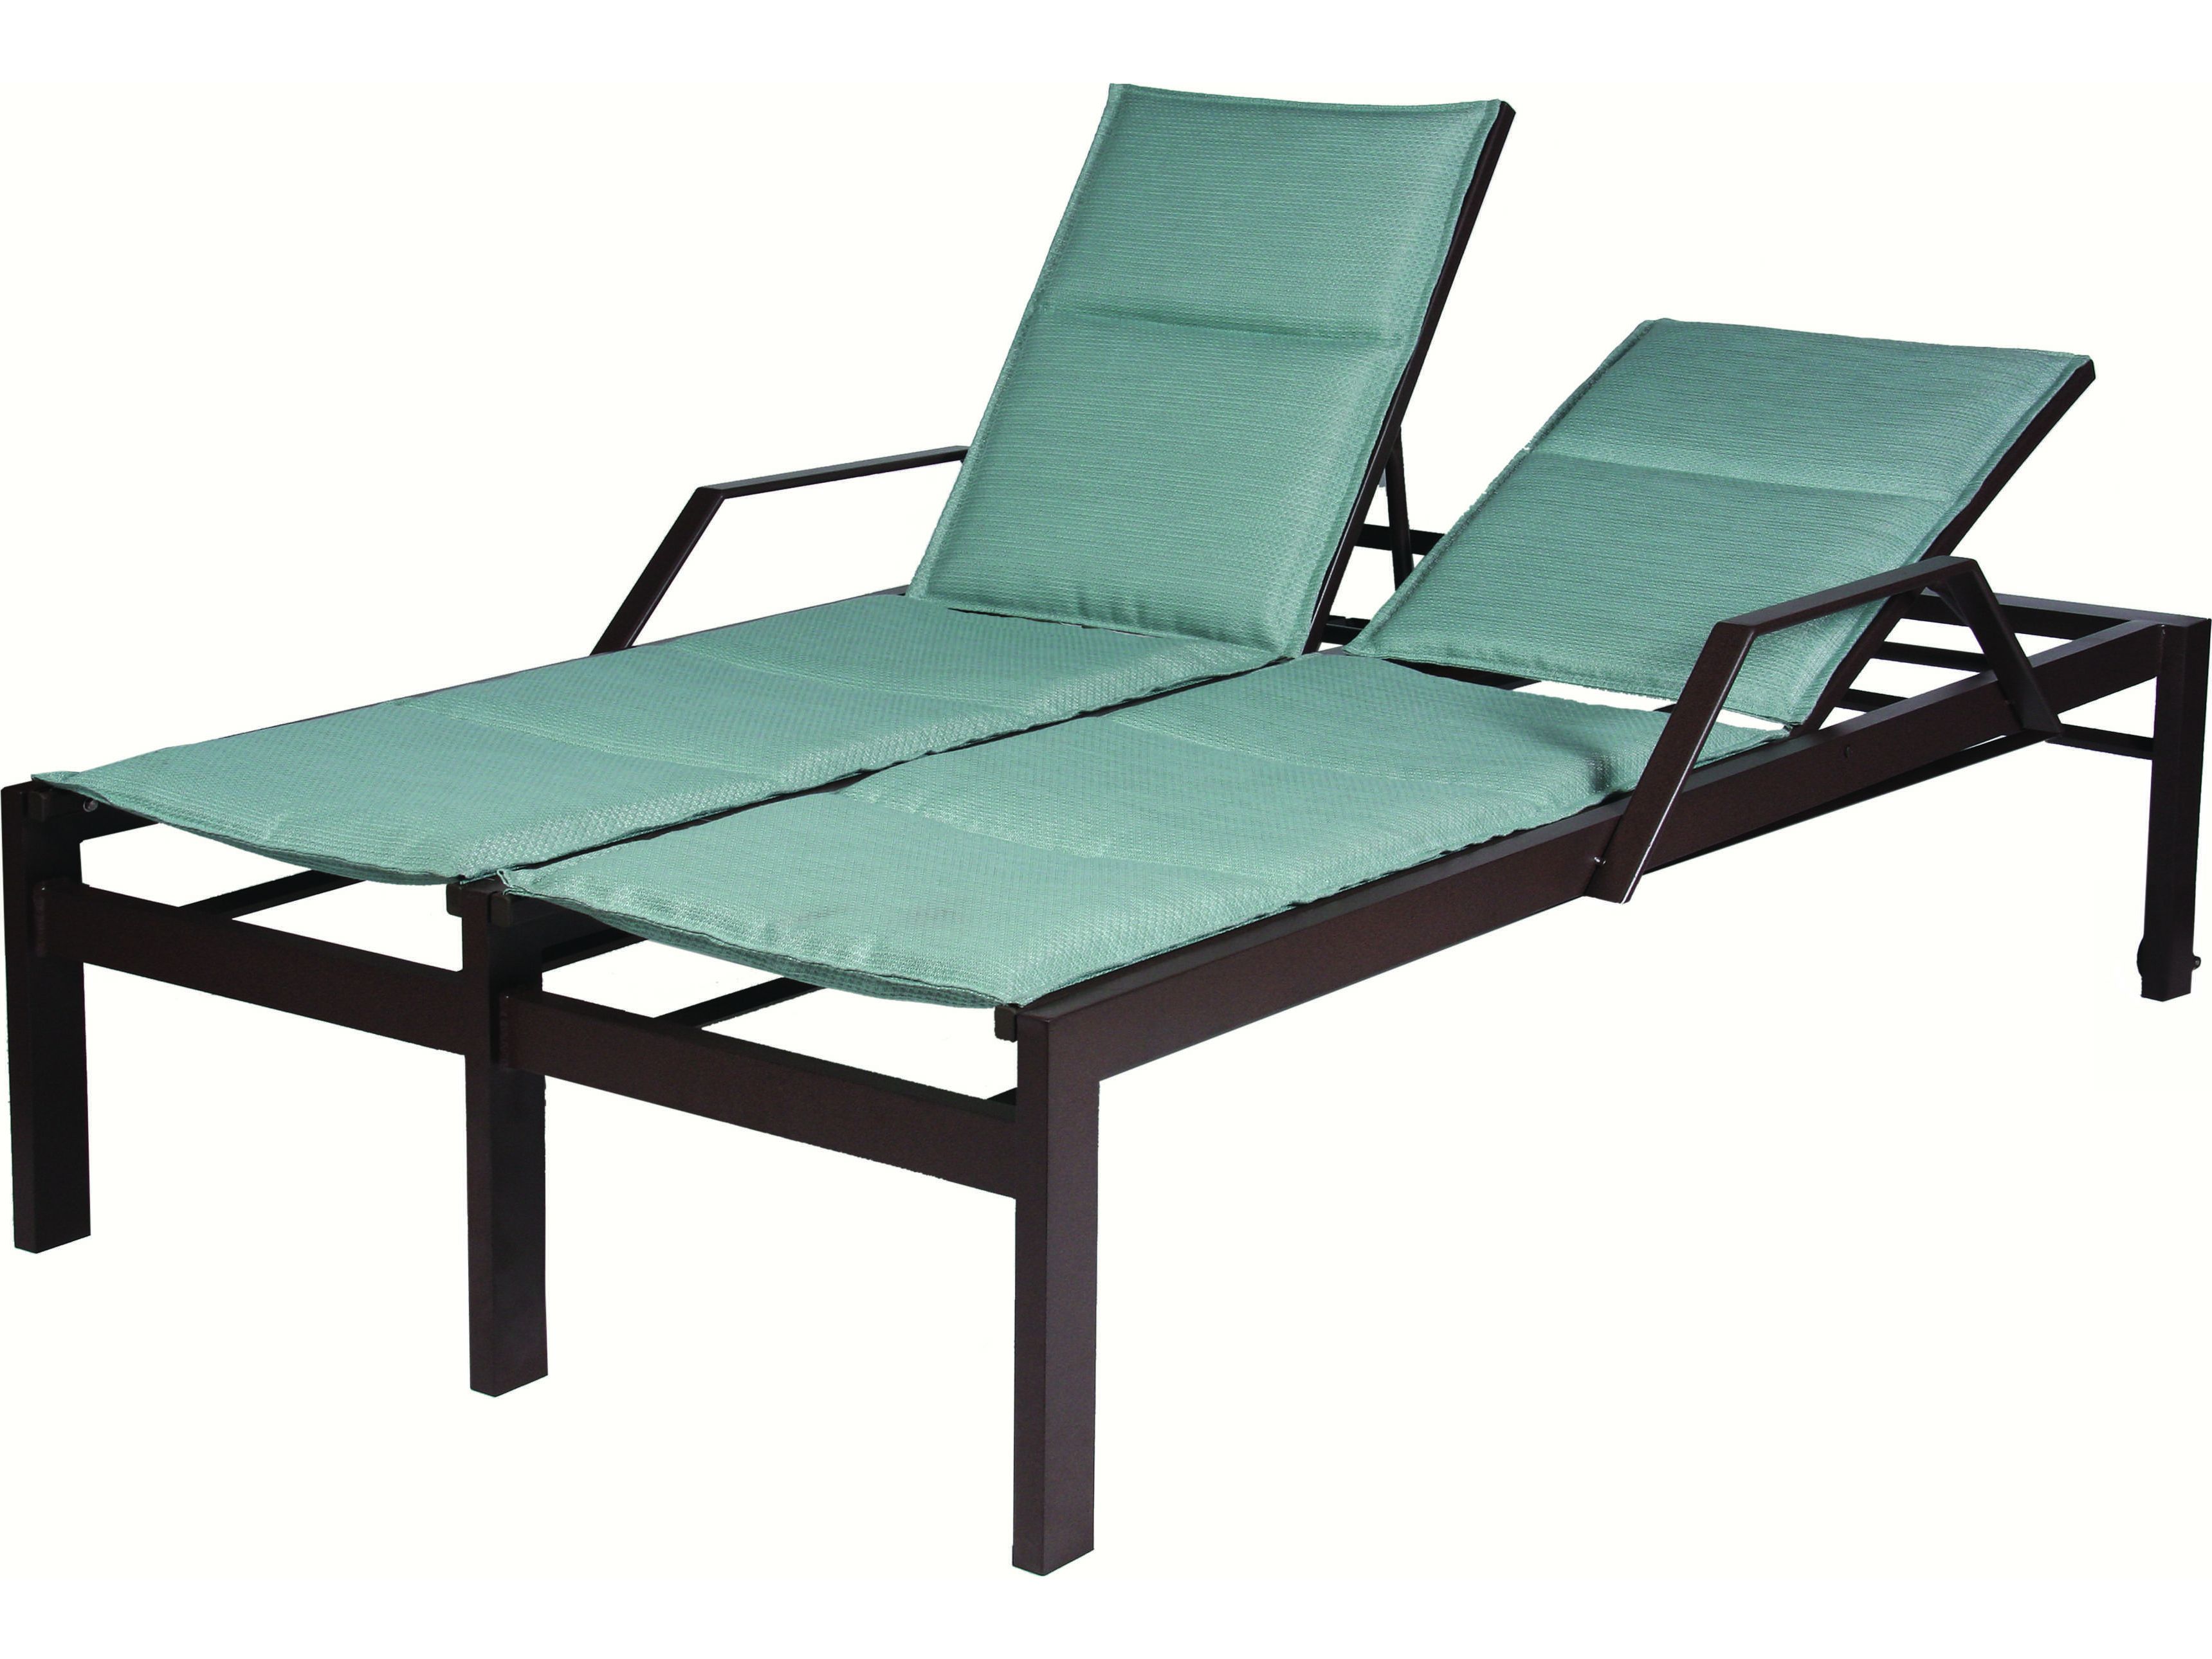 Famous Sling Patio Chaise Lounges Pertaining To Suncoast Vectra Bold Sling Cast Aluminum Double Chaise Lounge With Wheels (View 15 of 25)